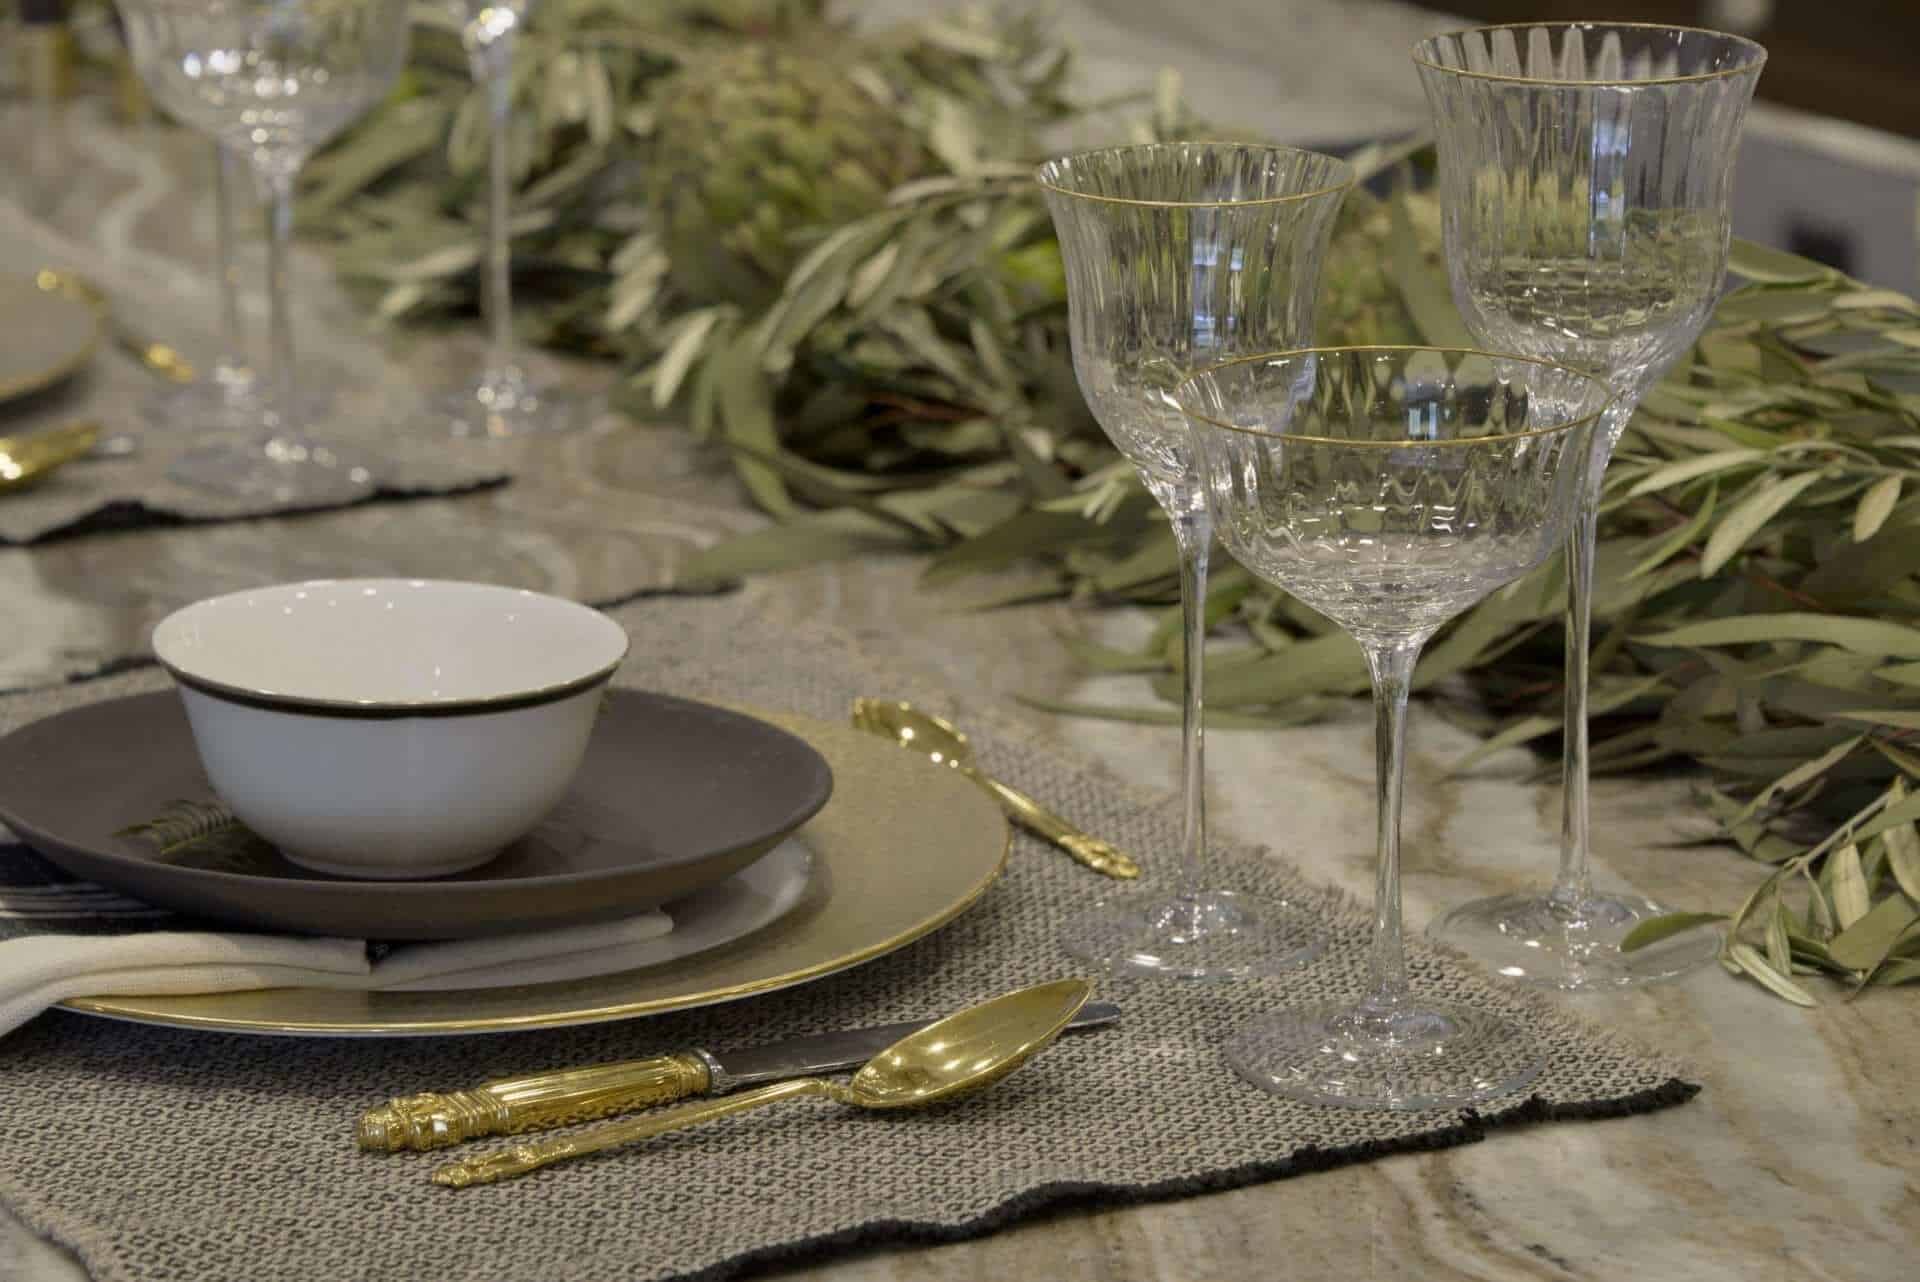 Tabelscape with gold flatware, textured placemat and fresh herbs